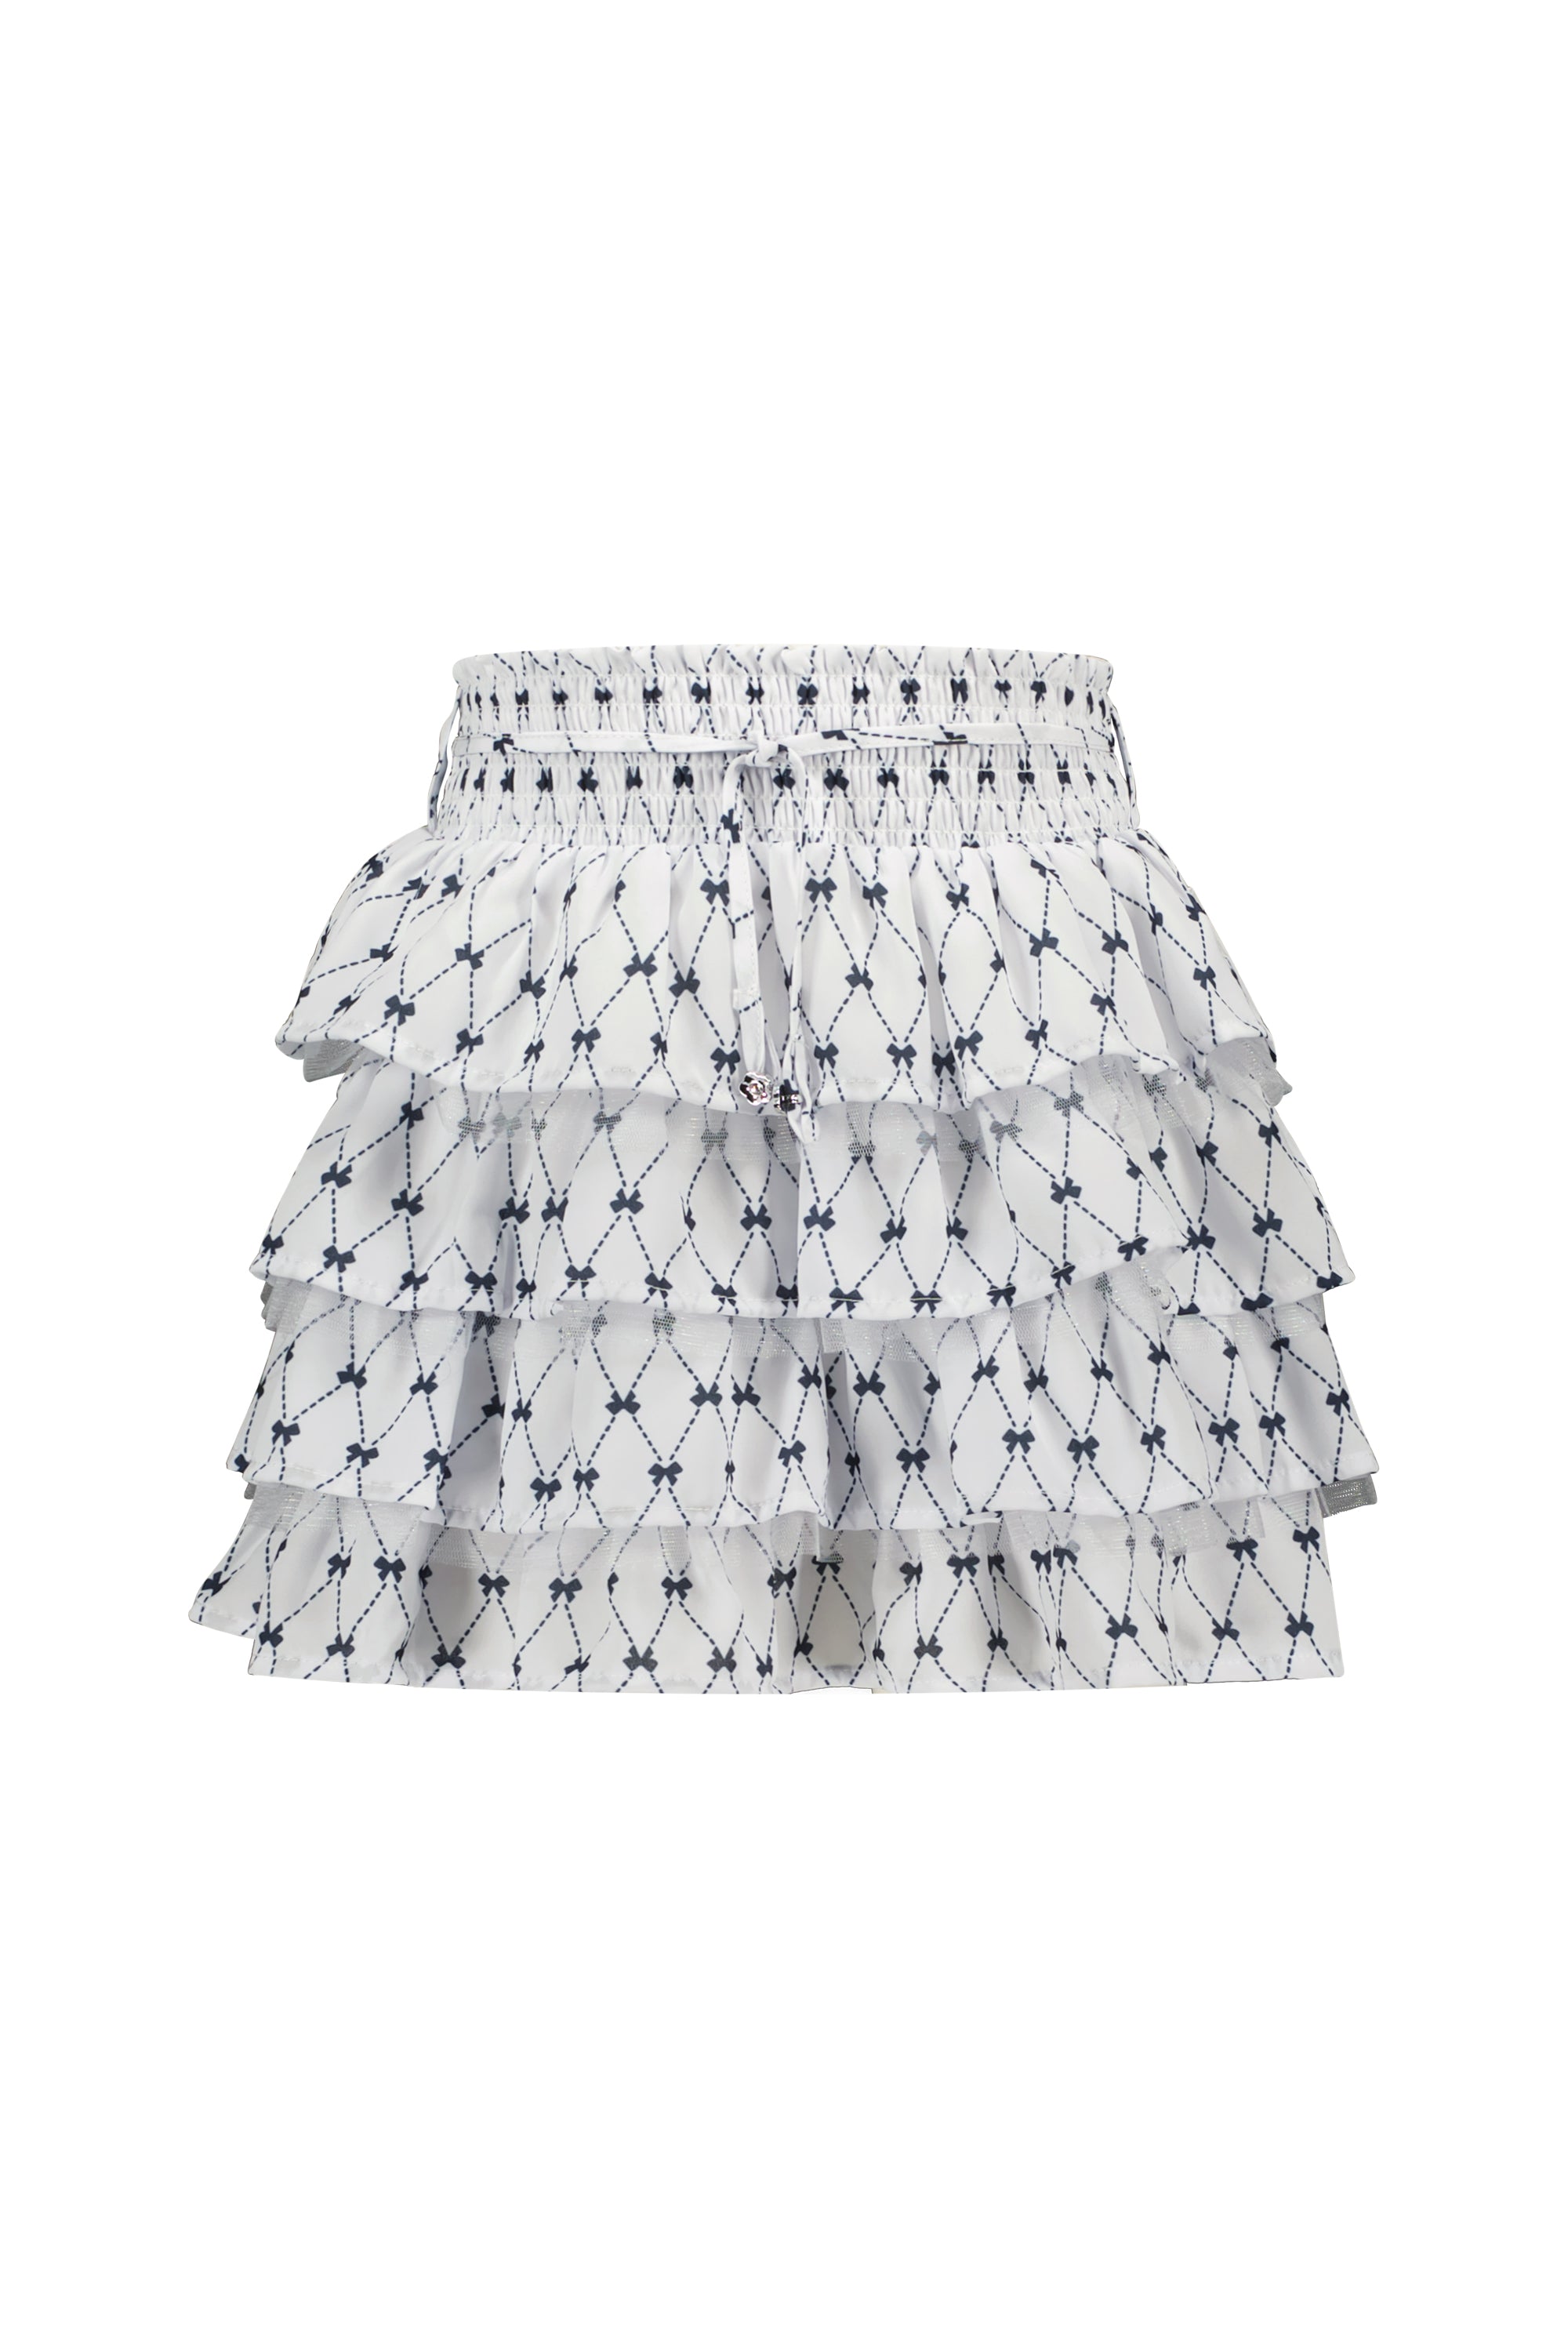 TOLLY signature bow skirt